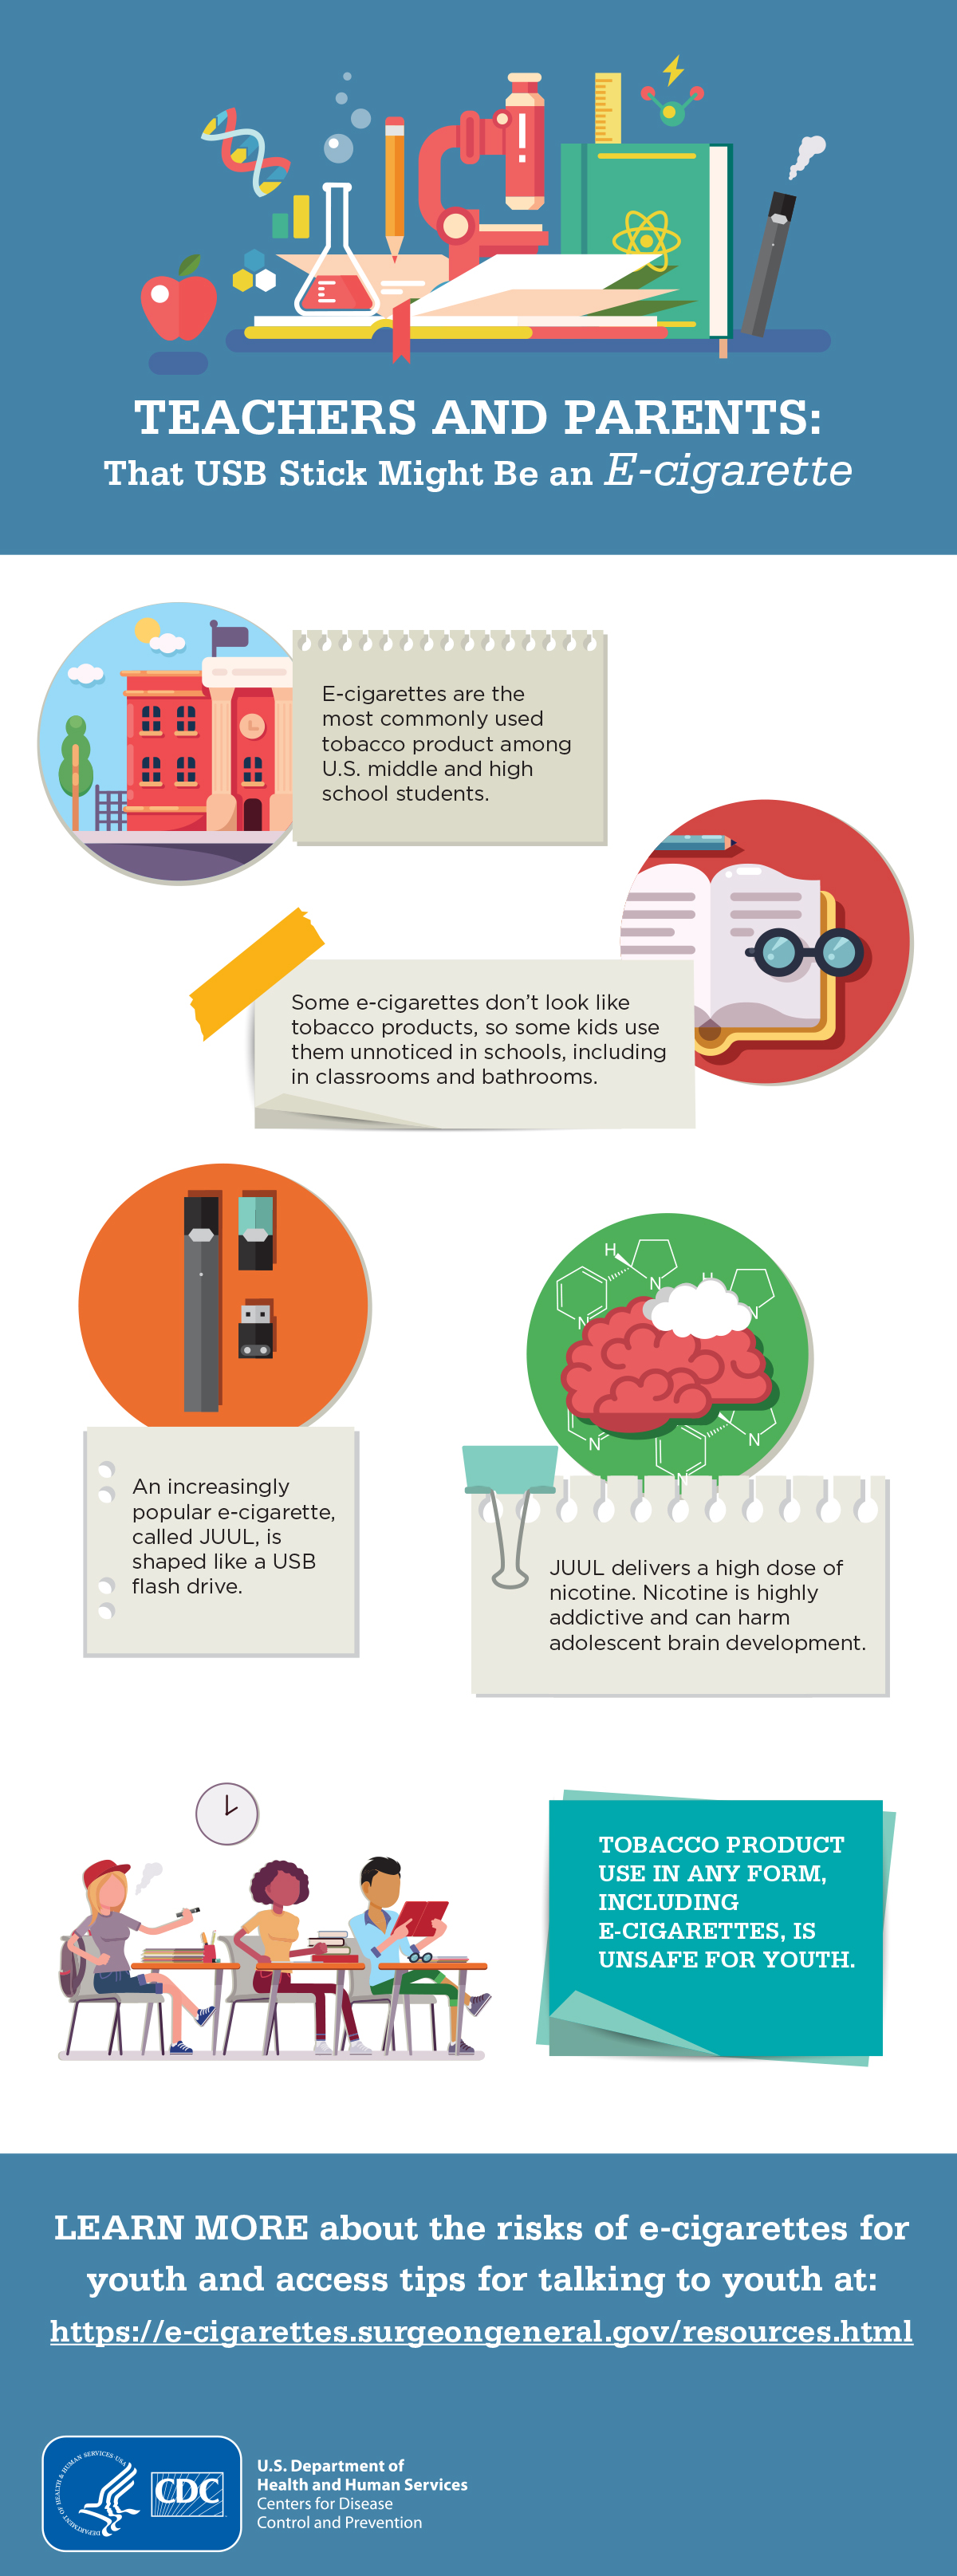 Ecig infographic for teachers and parents